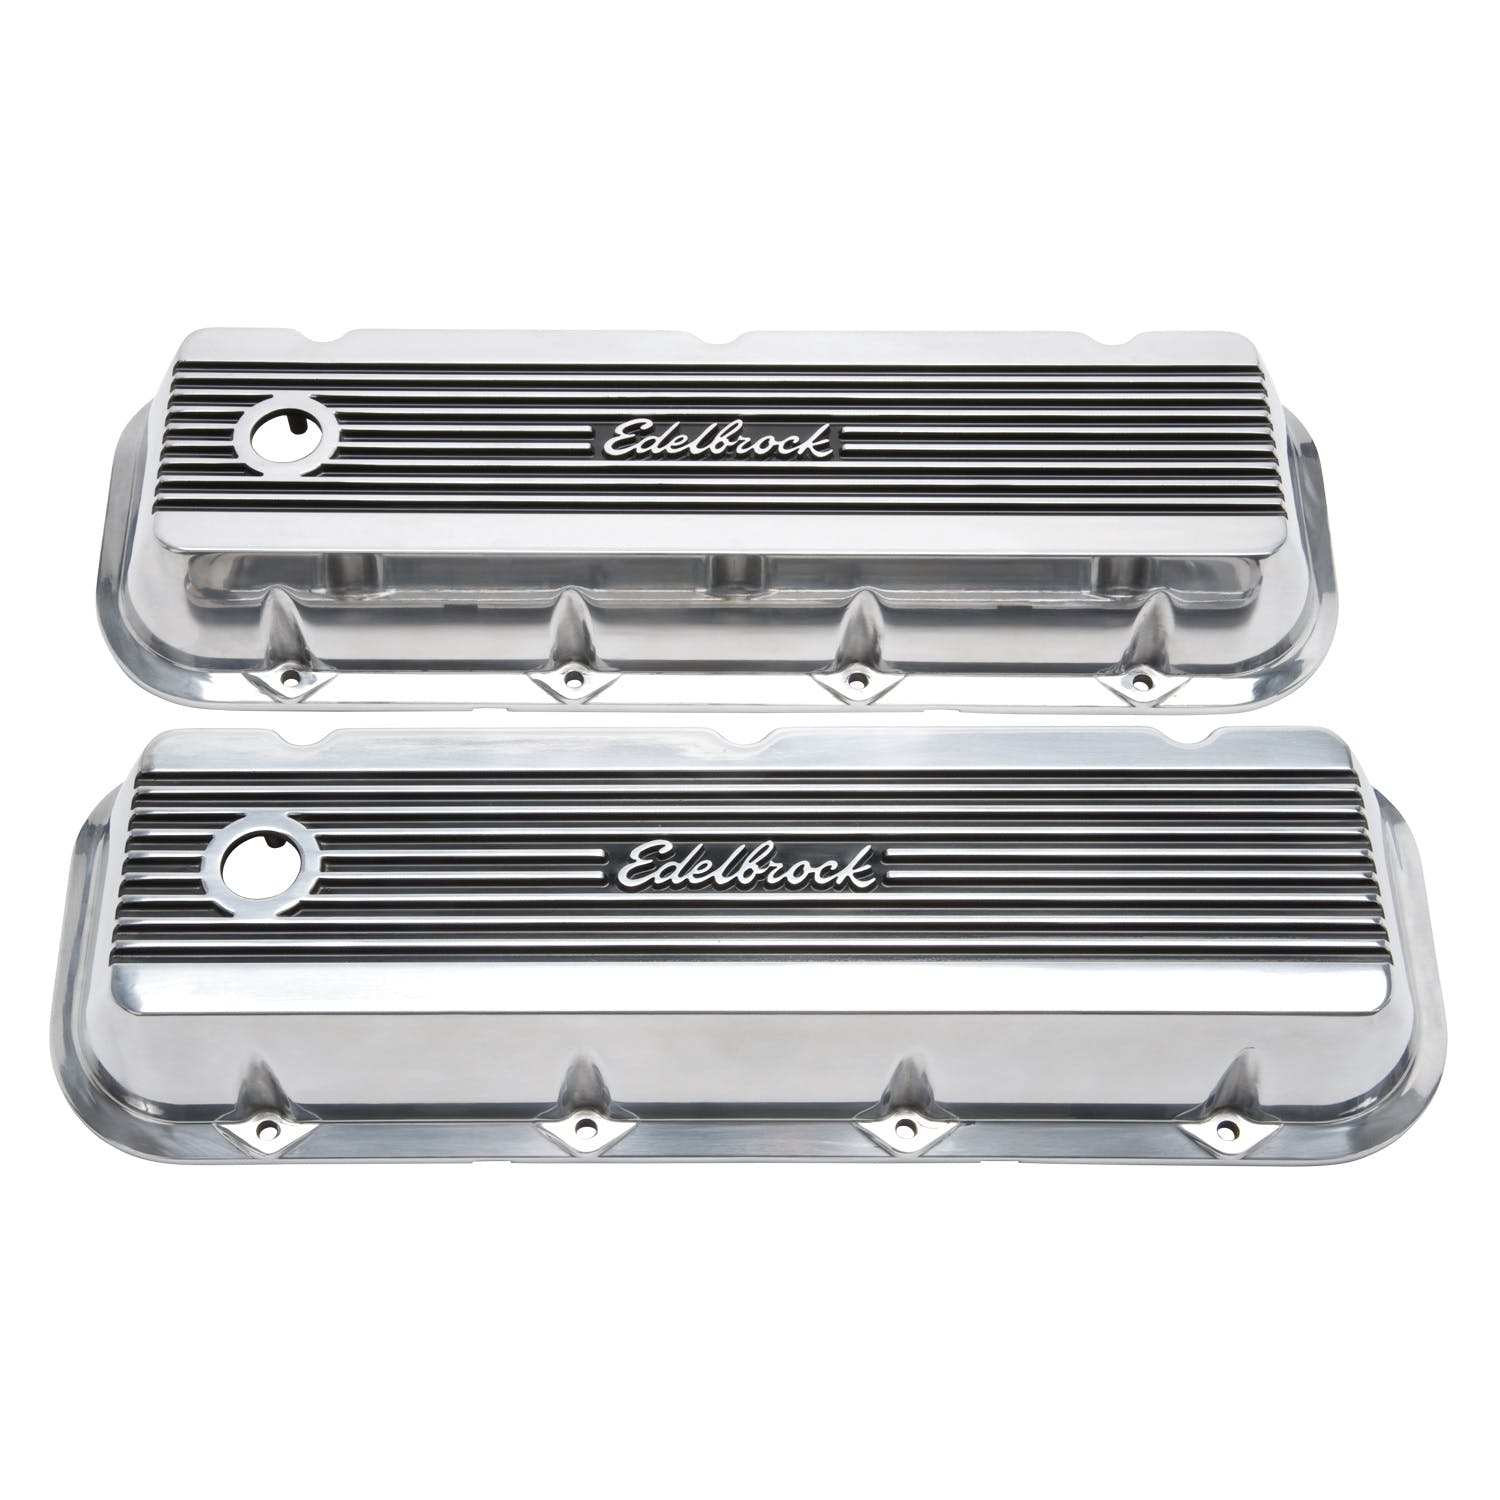 Edelbrock 4275 Elite II Valve Covers for Chevy Big-Block V8 1965 and Later.